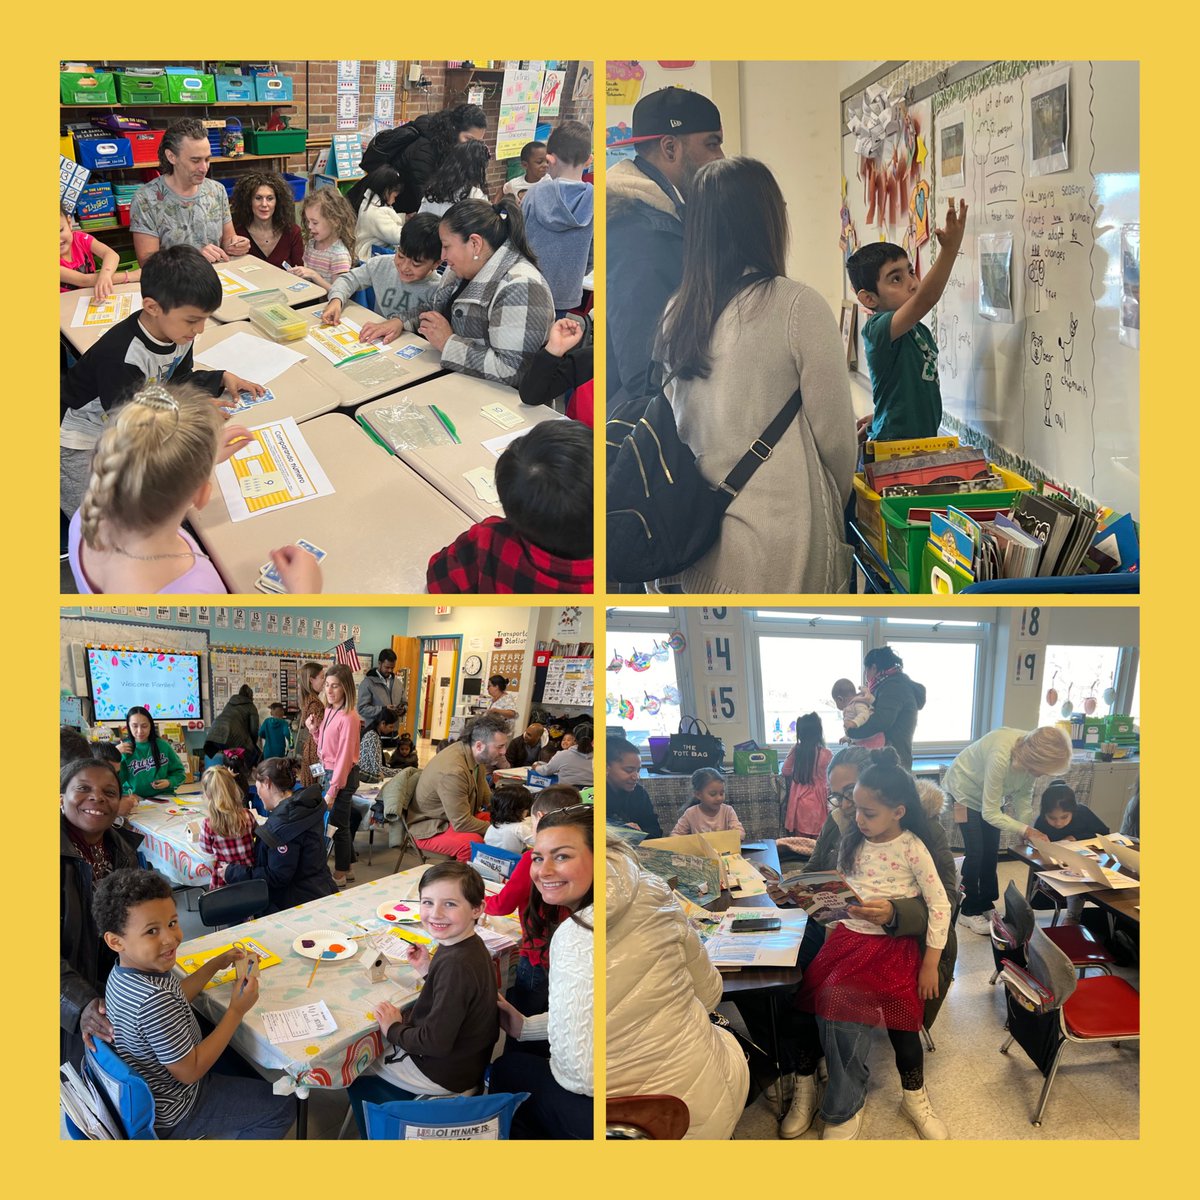 It was bring your Family to School for our Kindergarten students. Family Day is always one of my favorite days. Thank you, families for joining us today. ⁦@OssiningSchools⁩ ⁦@Mary_FoxAlter⁩ ⁦⁦@mariaAmeyer03⁩ ⁦@KimberlyMauri10⁩ ⁦@JessicaTurnerNY⁩